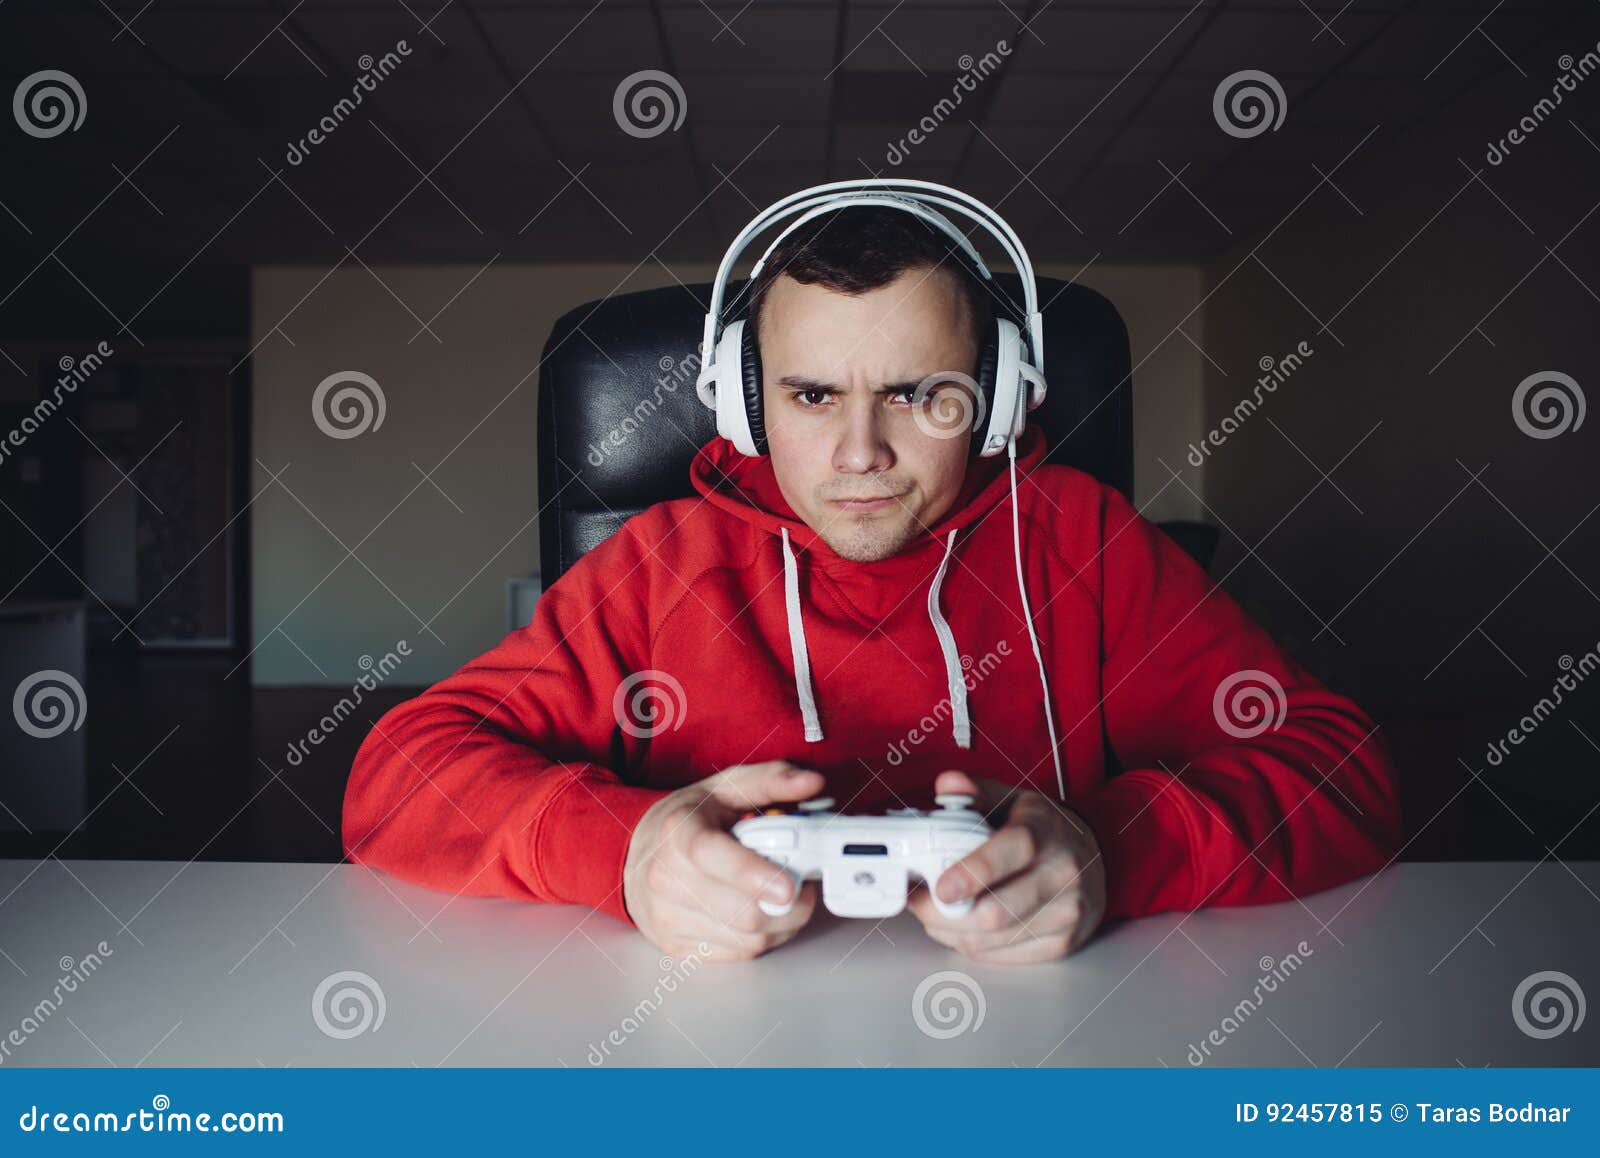 Person playing video games with controller on computer Stock Photo